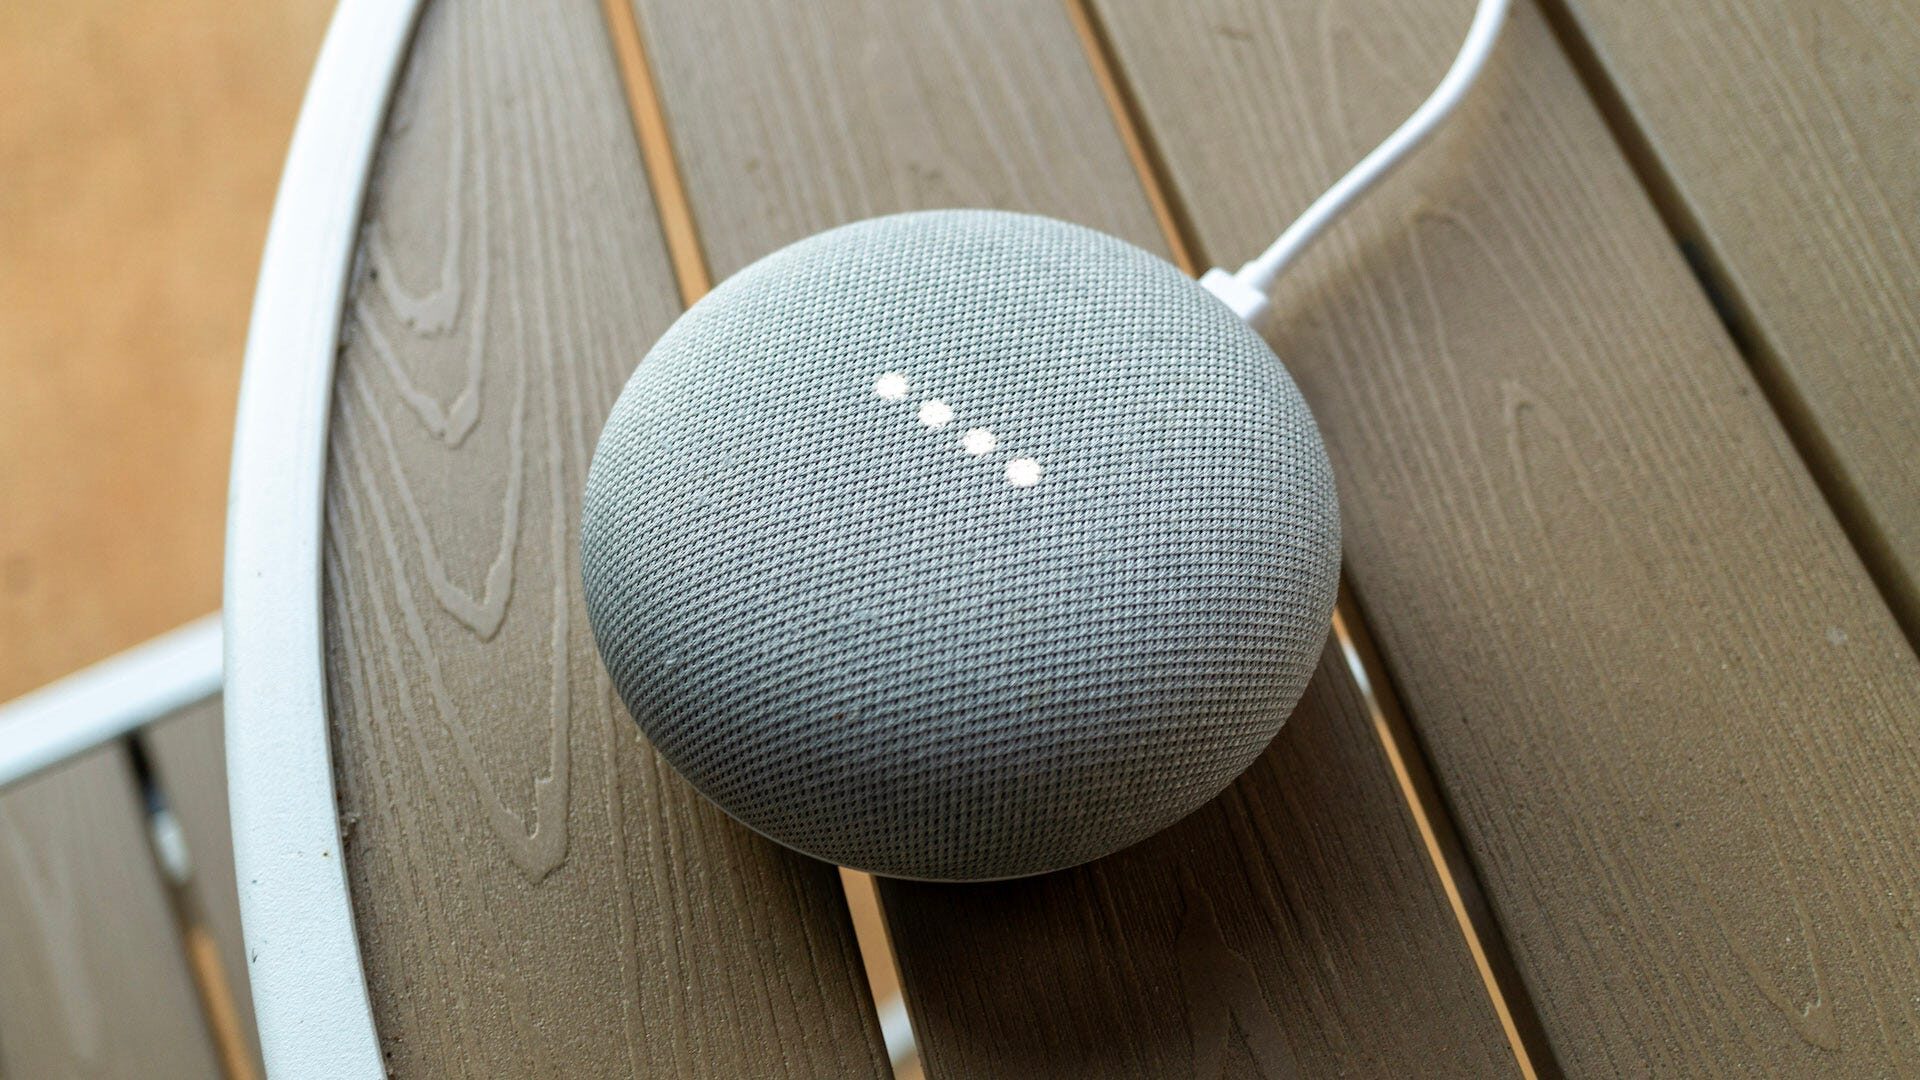 Google Nest Users Report Problems with Radio and SiriusXM